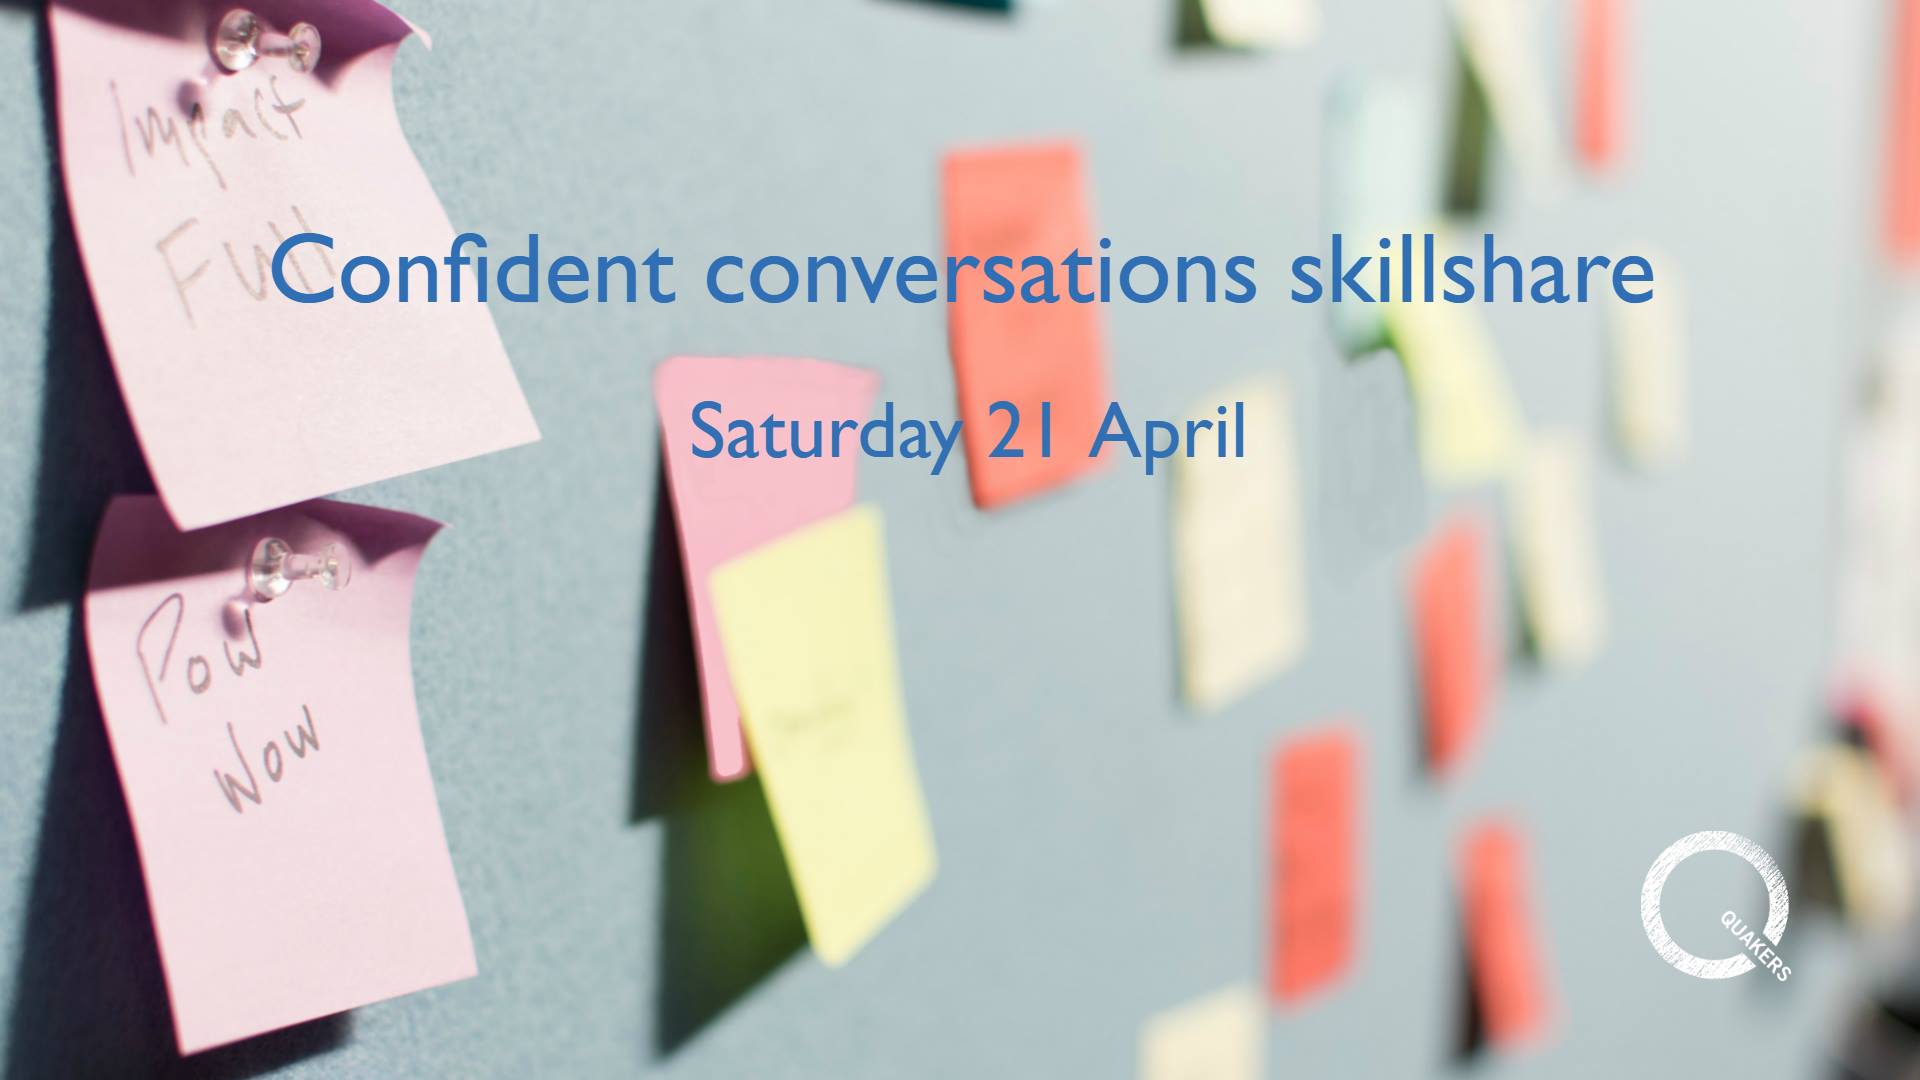 Wall of colourful post-its overlaid with event title: Confident conversations skillshare